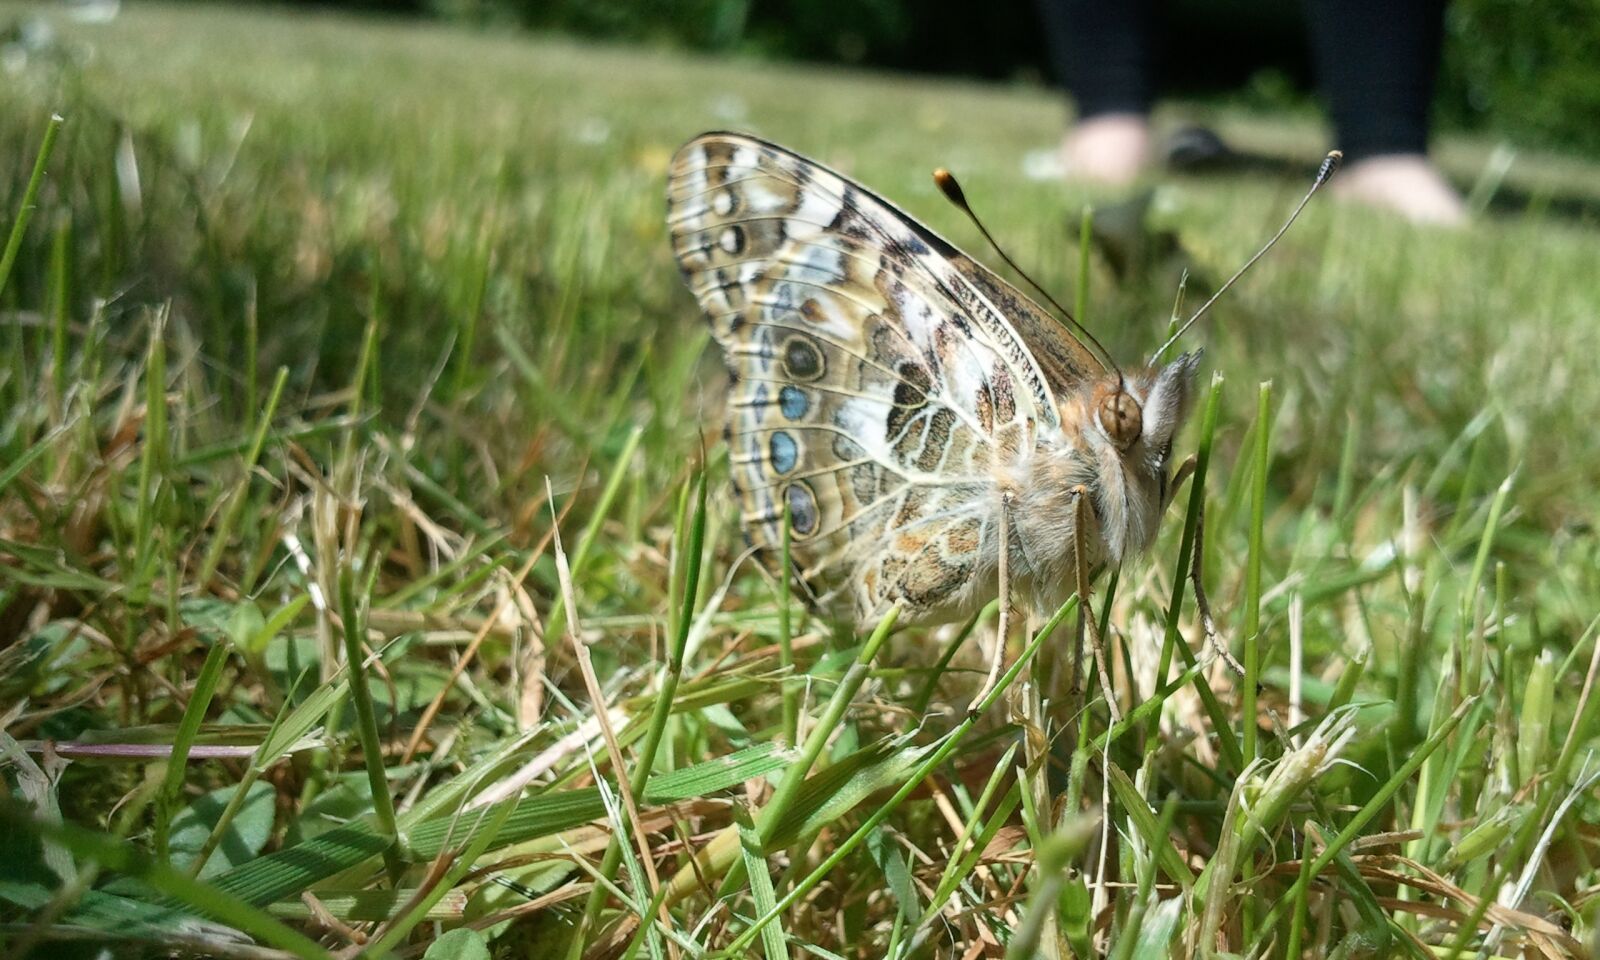 Samsung Galaxy S sample photo. Butterfly, nature, grass photography